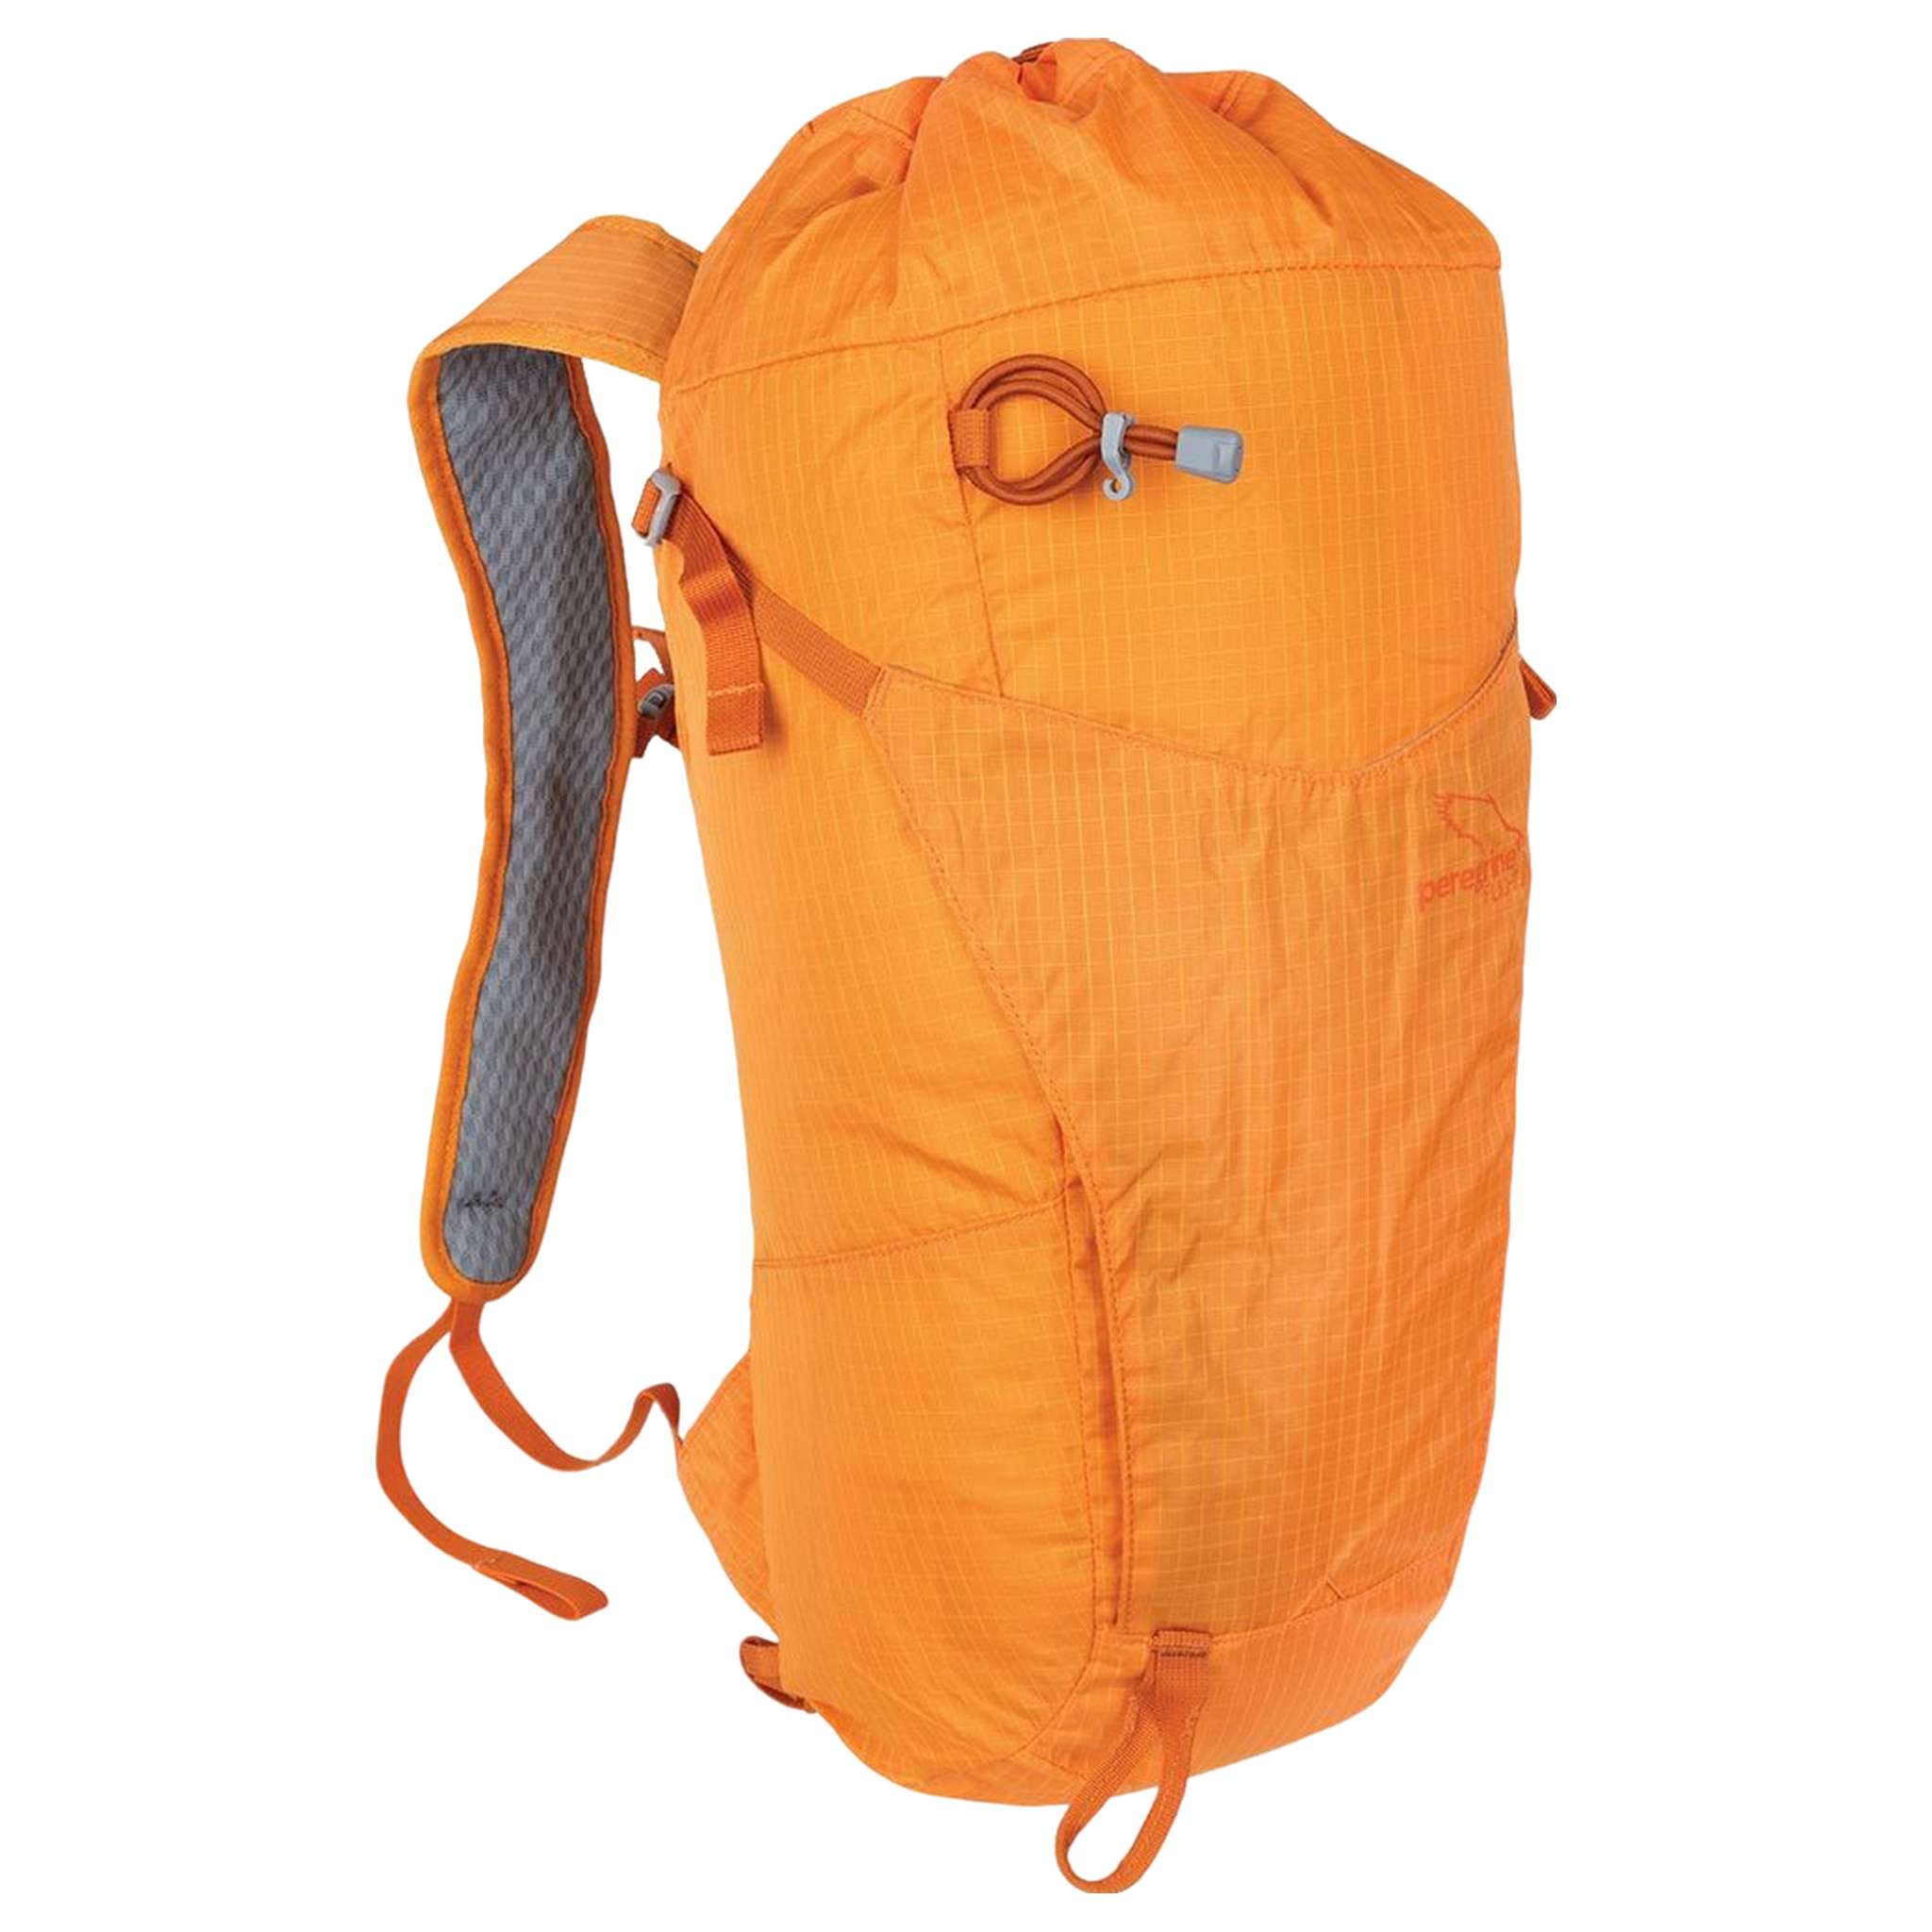 FLIGHT 18+ Lightweight Daypack – Durable for Summits & Scree Fields